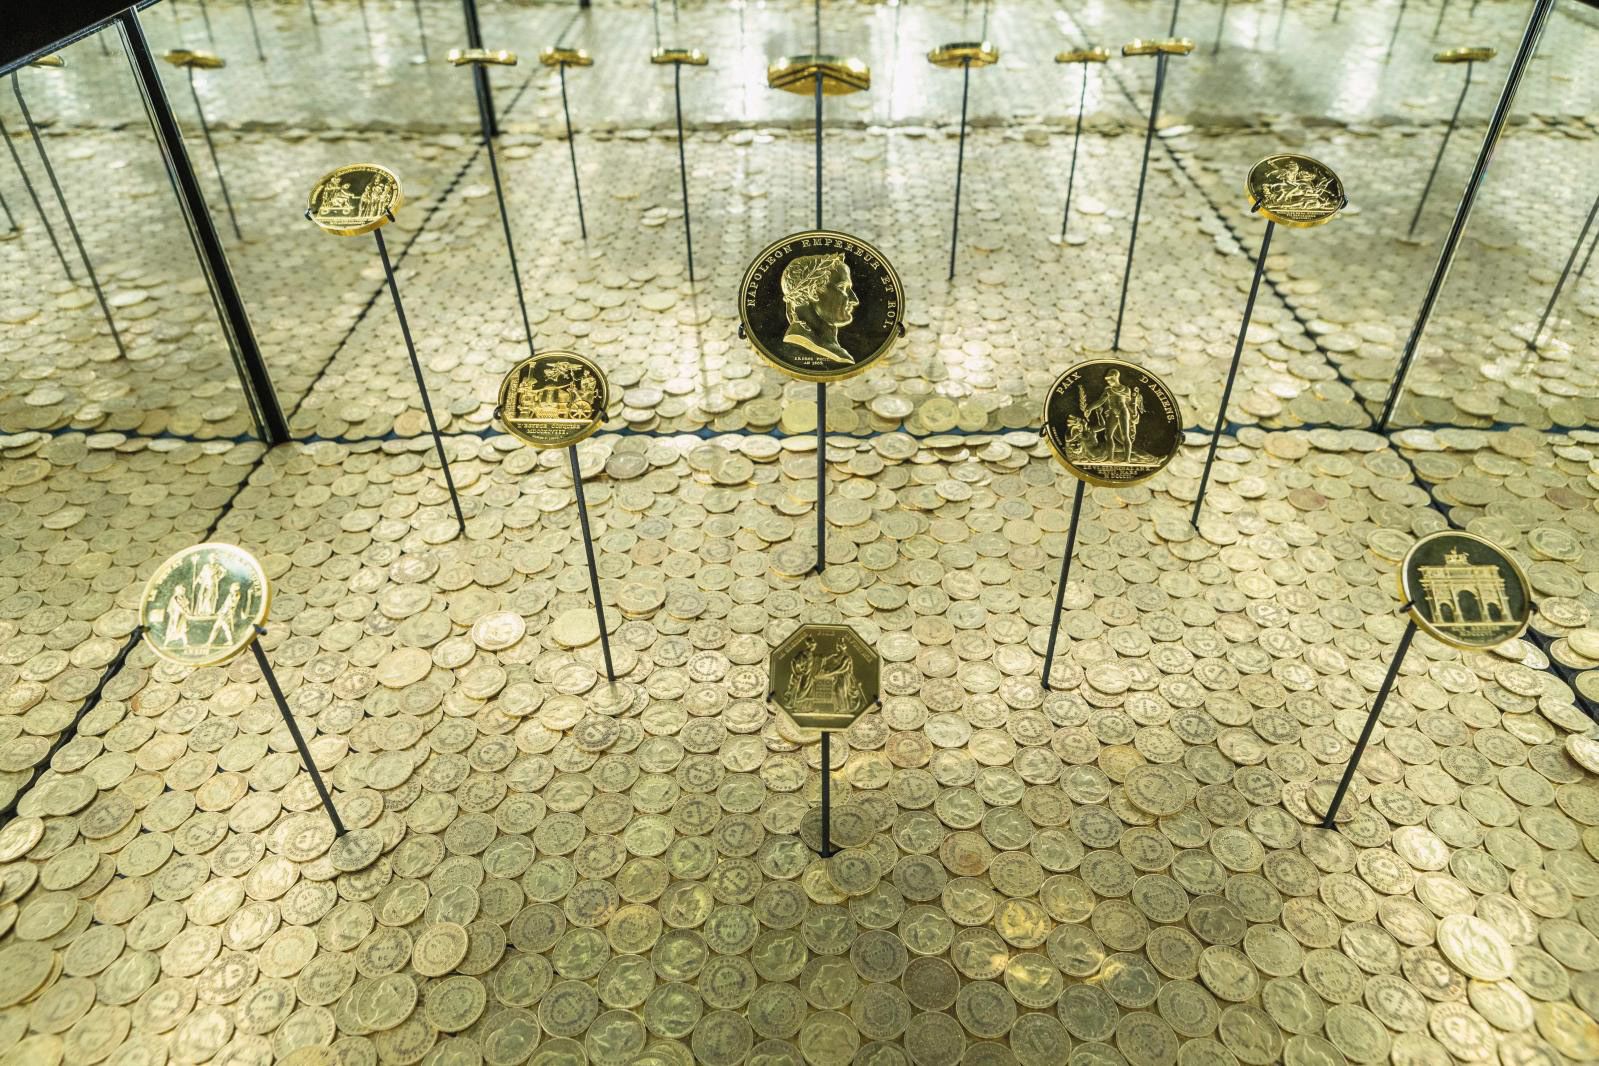 Napoleonic medals on a carpet of 2,021 napoleons for the exhibition at the Grande Halle de La Villette. In the foreground, the eight-sided